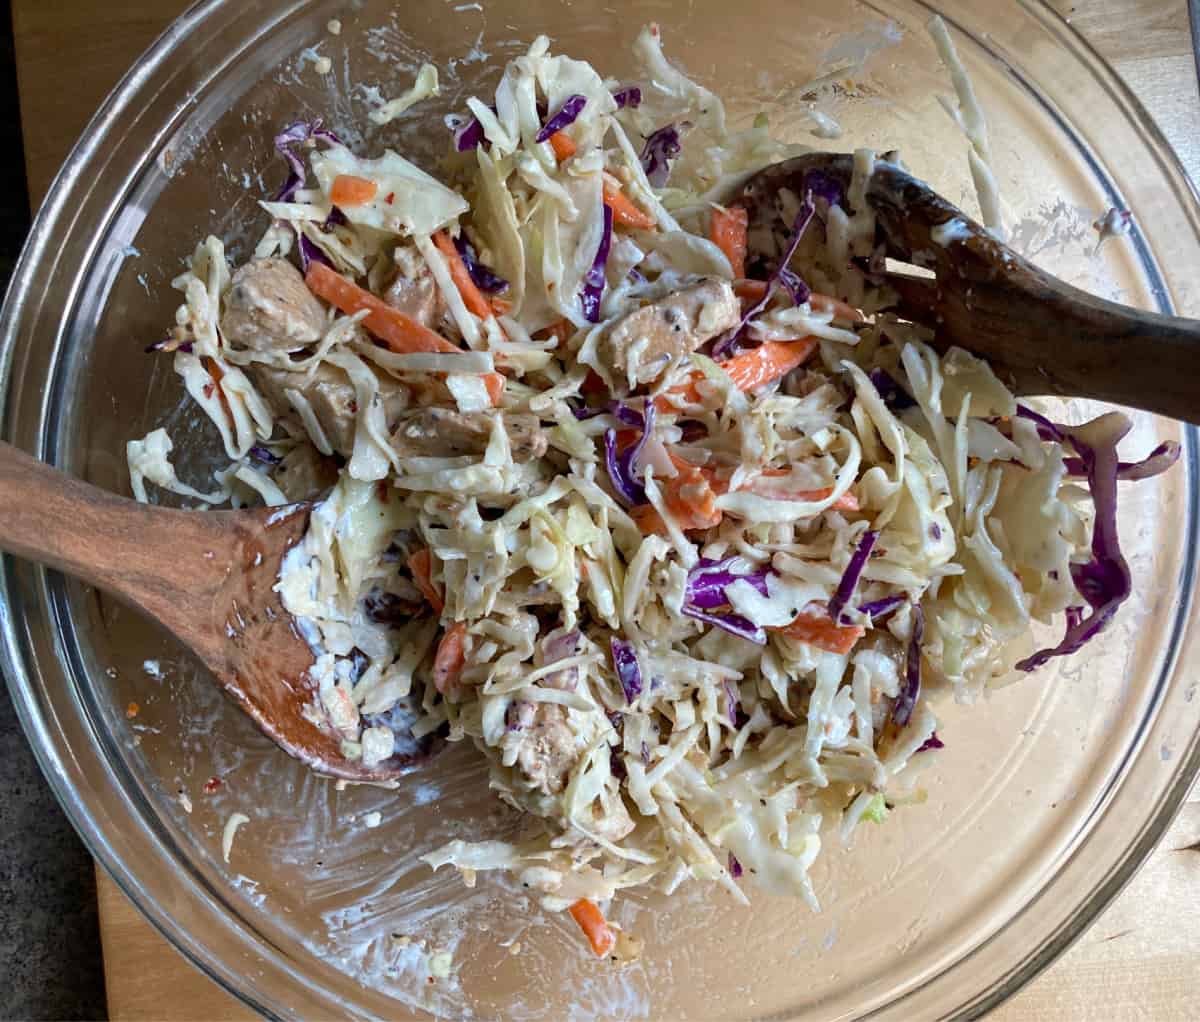 Mixing shredded chicken, cole slaw mix and caesar dressing in mixing bowl with wooden spoons.